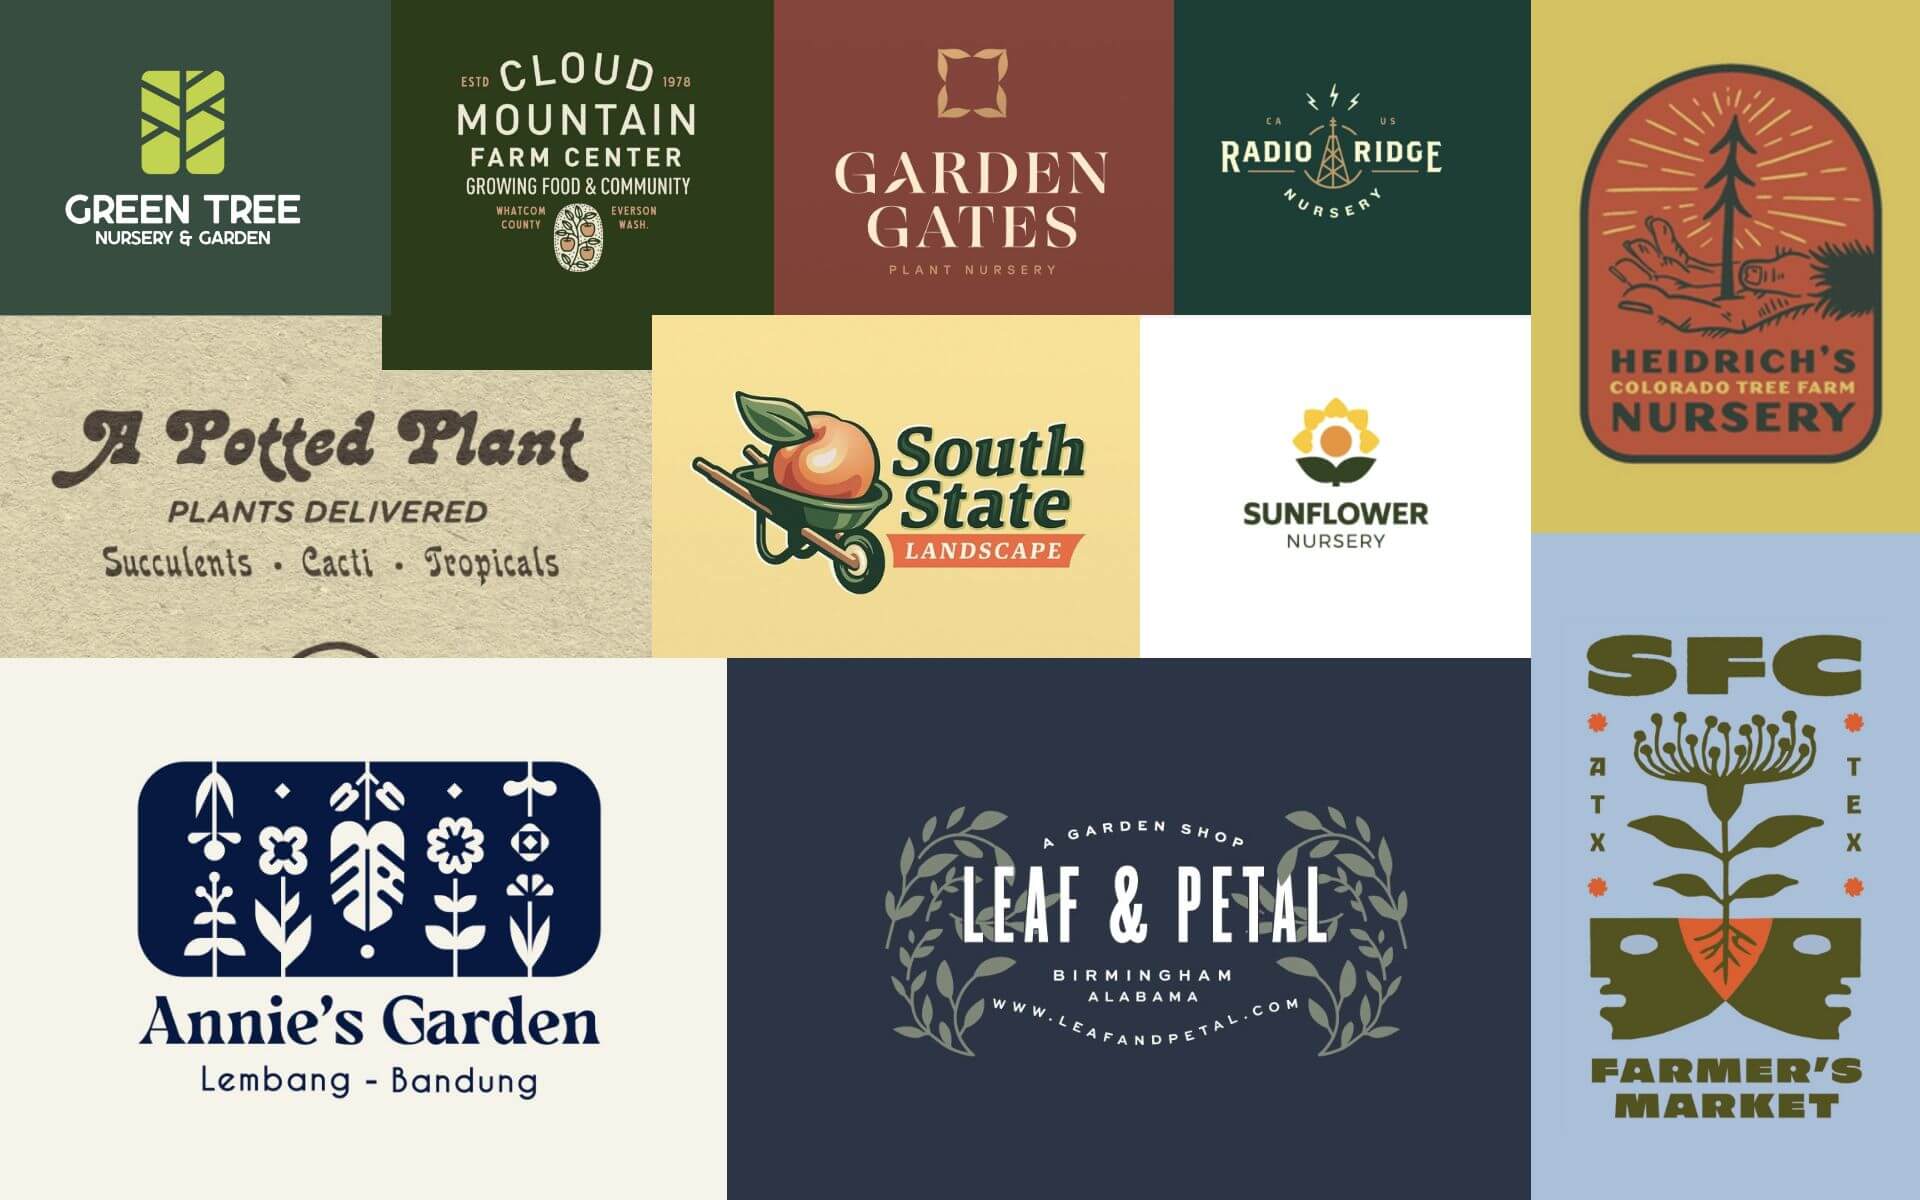 Dribbble branding research for a nursery company